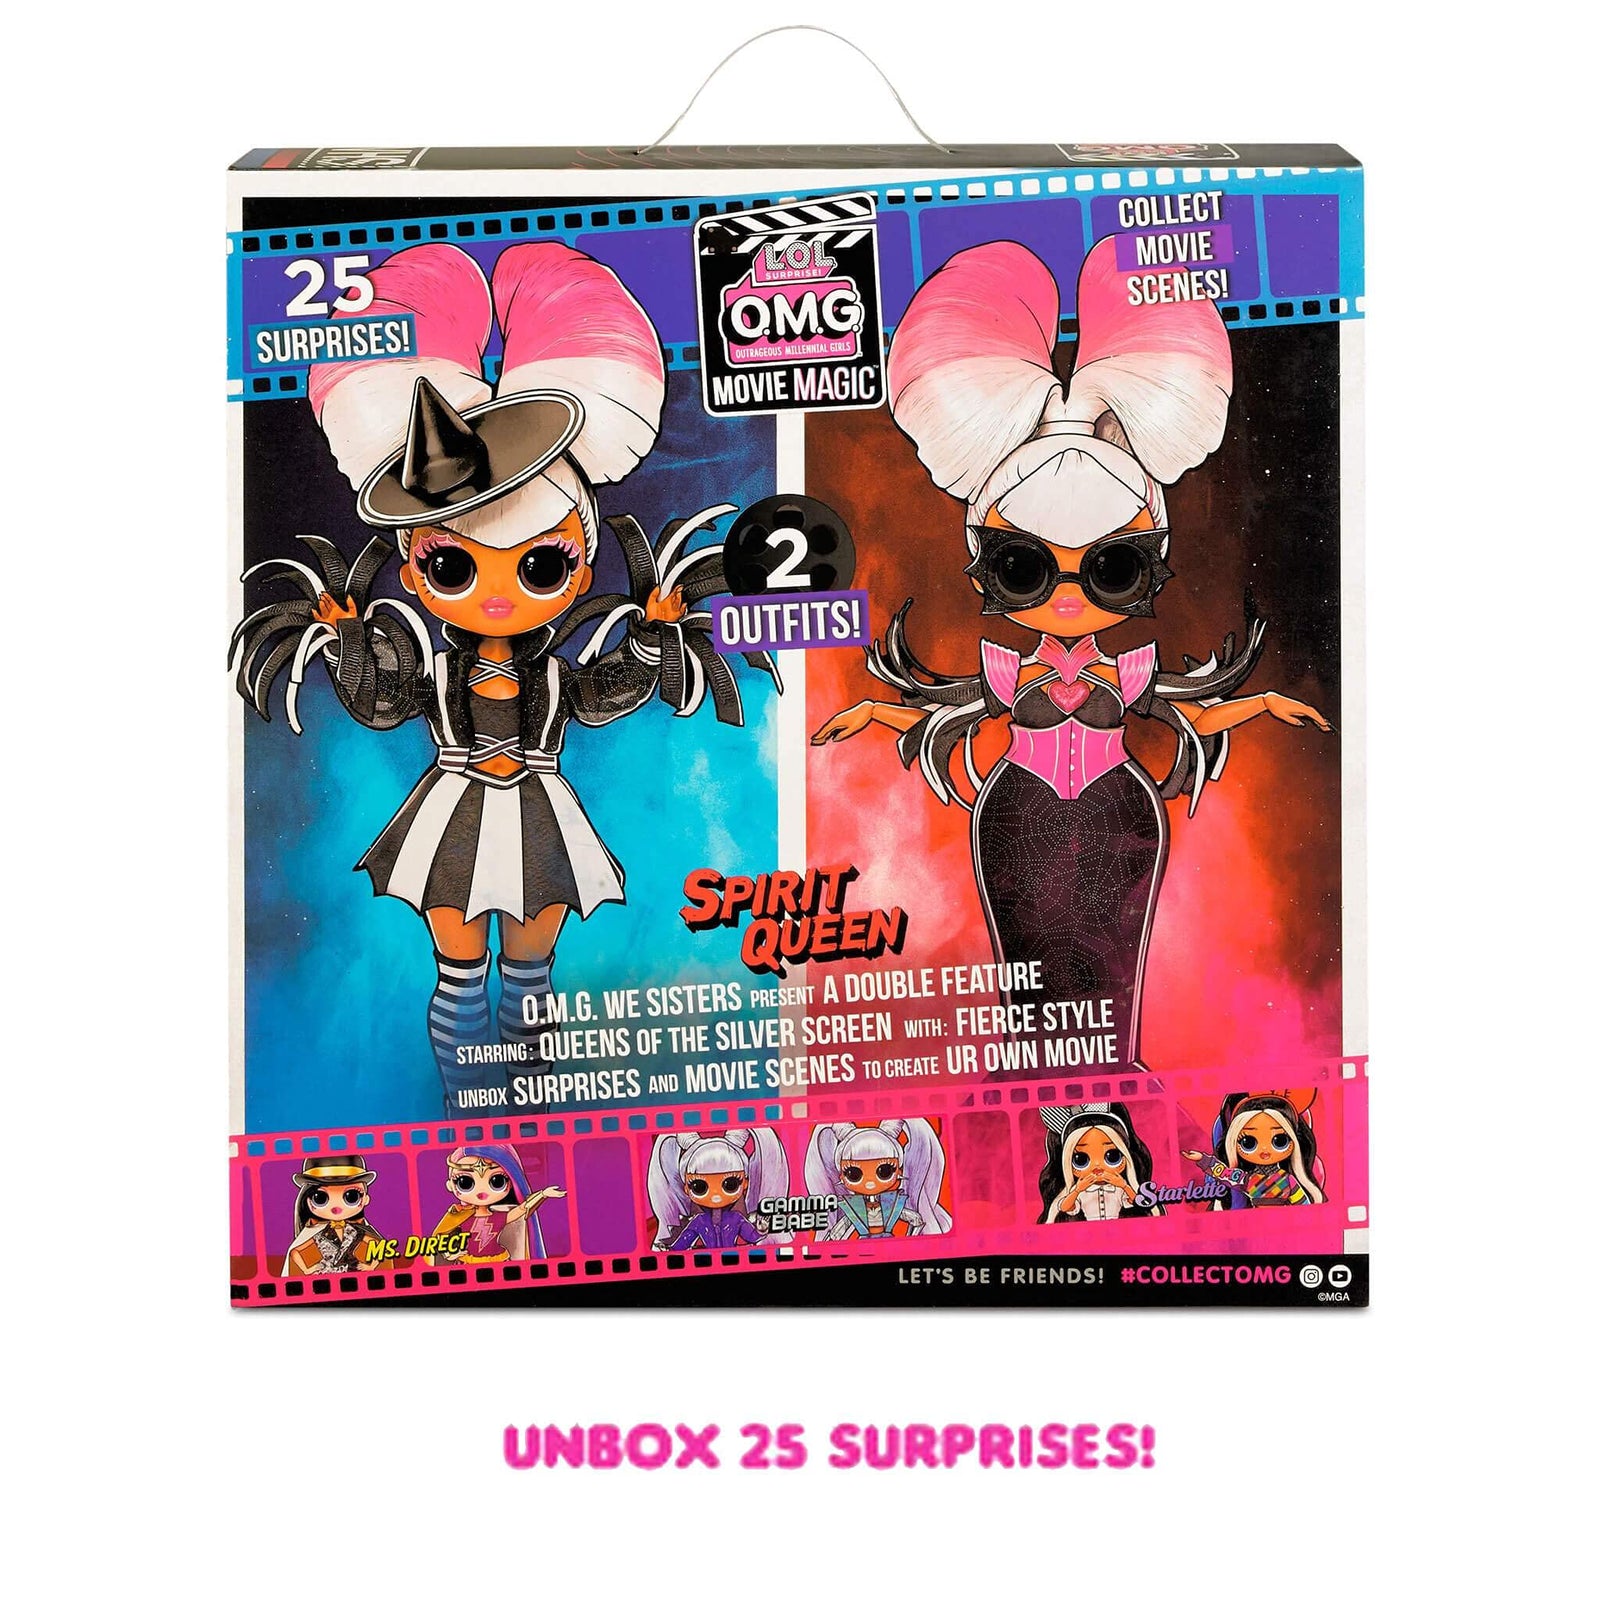 LOL Surprise OMG Movie Magic Spirit Queen Fashion Doll with 25 Surprises Including 2 Outfits, 3D Glasses, Movie Accessories and Reusable Playset– Gift for Kids, Toys for Girls Boys Ages 4 5 6 7+ Years